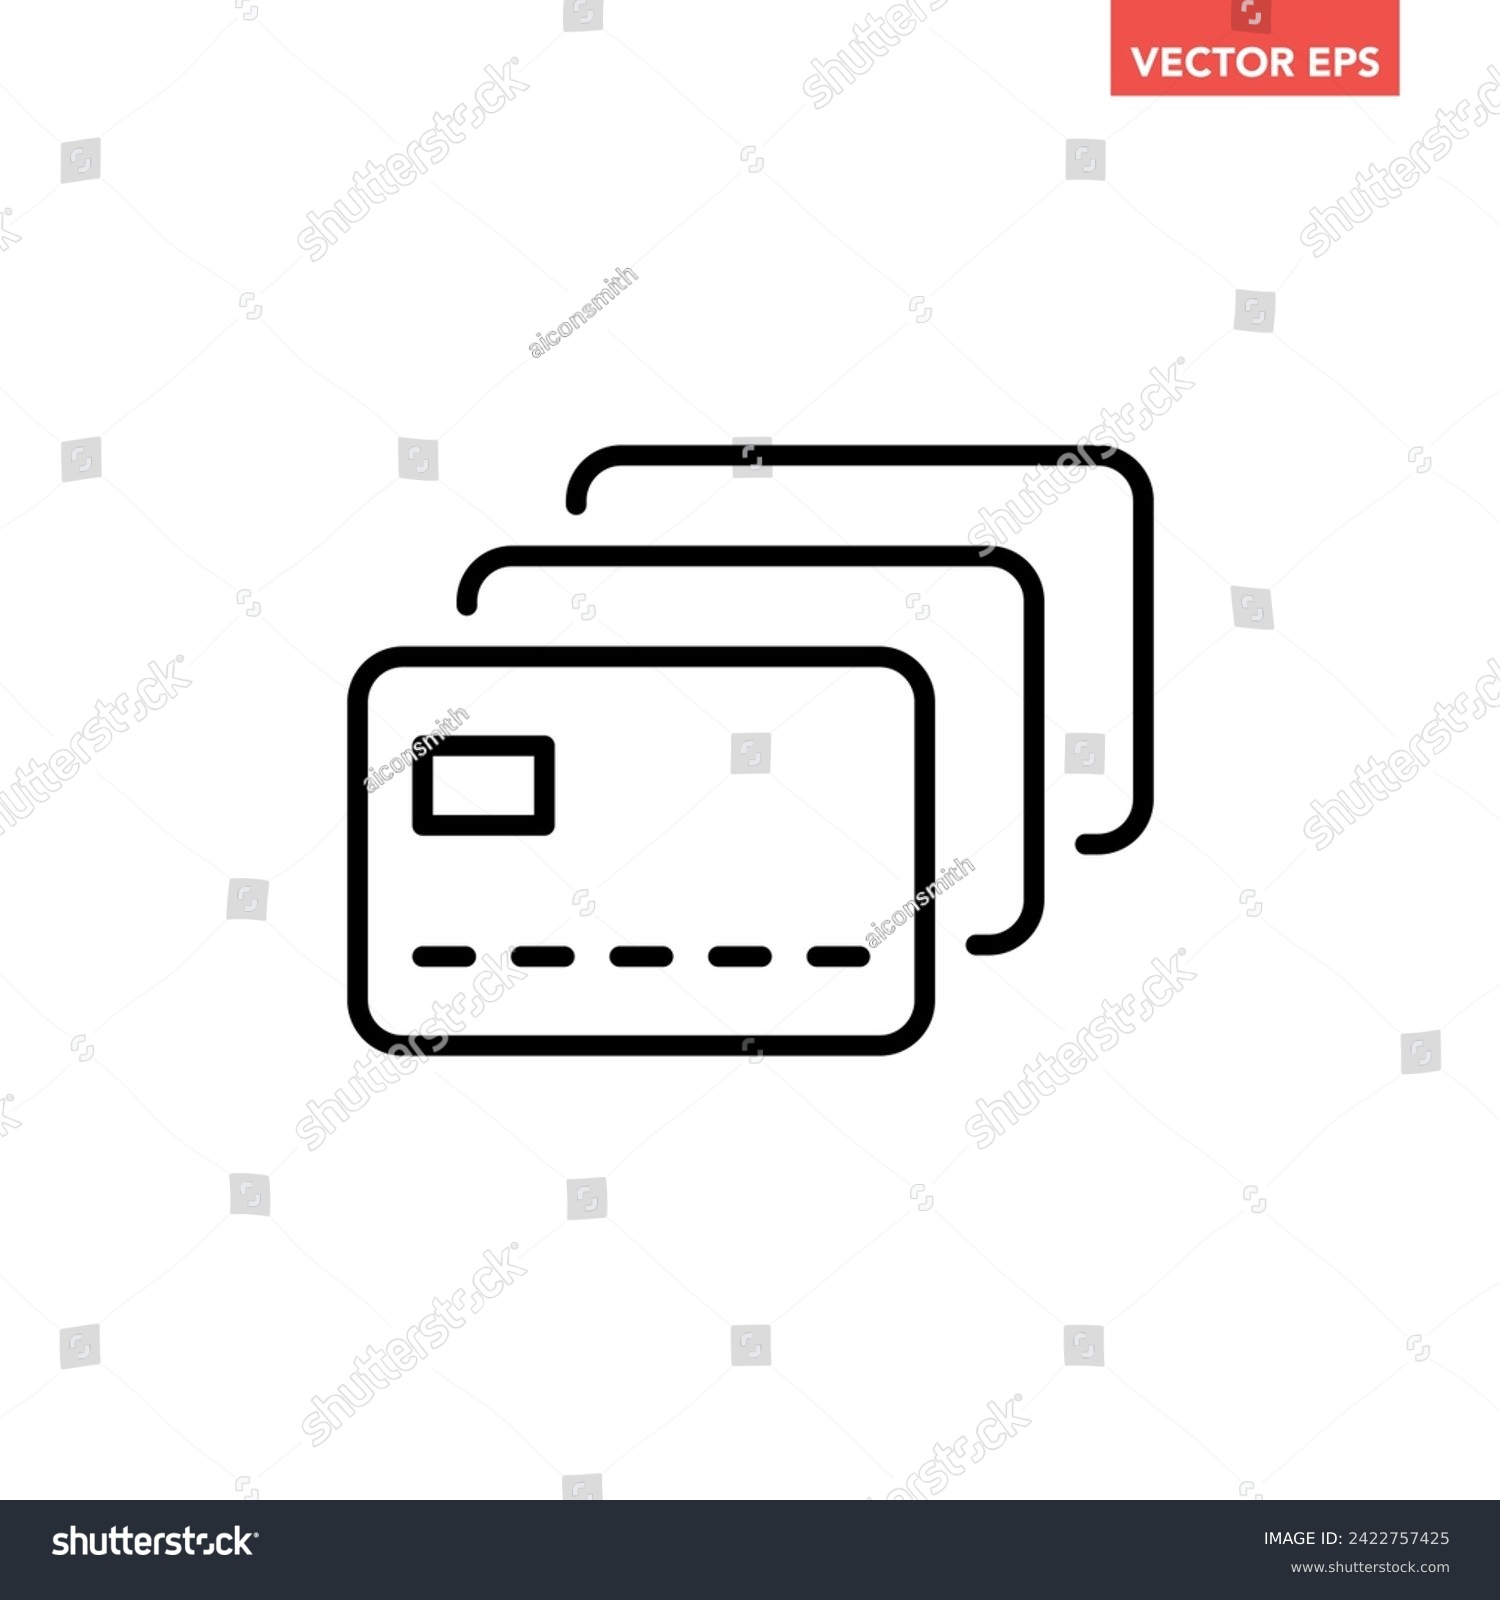 SVG of Black multi credit cards line icon, simple financial transaction flat design infographic pictogram vector,  for app logo web button ui ux interface elements isolated on white background svg